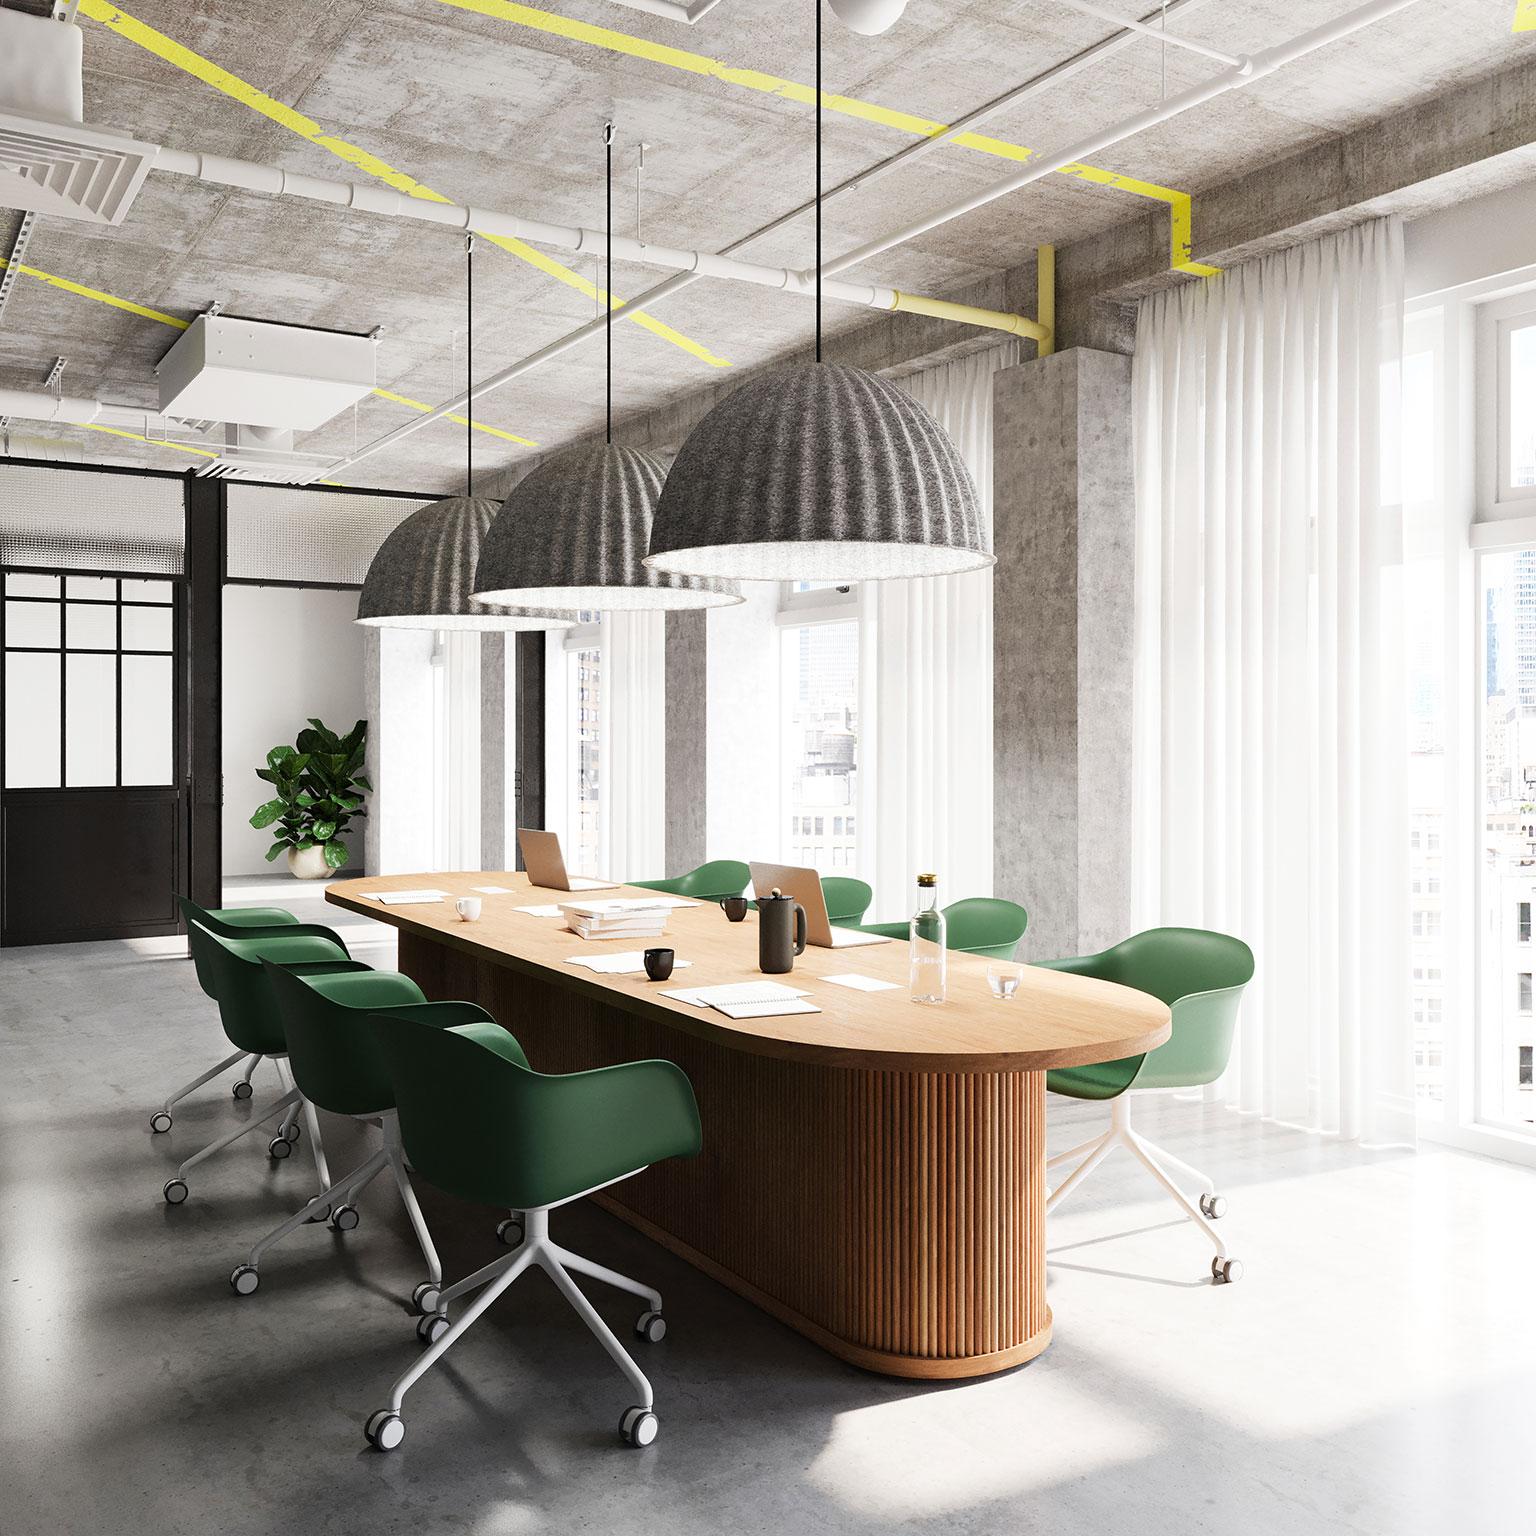 The radius conference table is a furniture piece that will set the tone of professionalism and style in your office. Solid wood has been trusted for generations as a durable and prestigious construction material. The table’s tambour wood wrapped